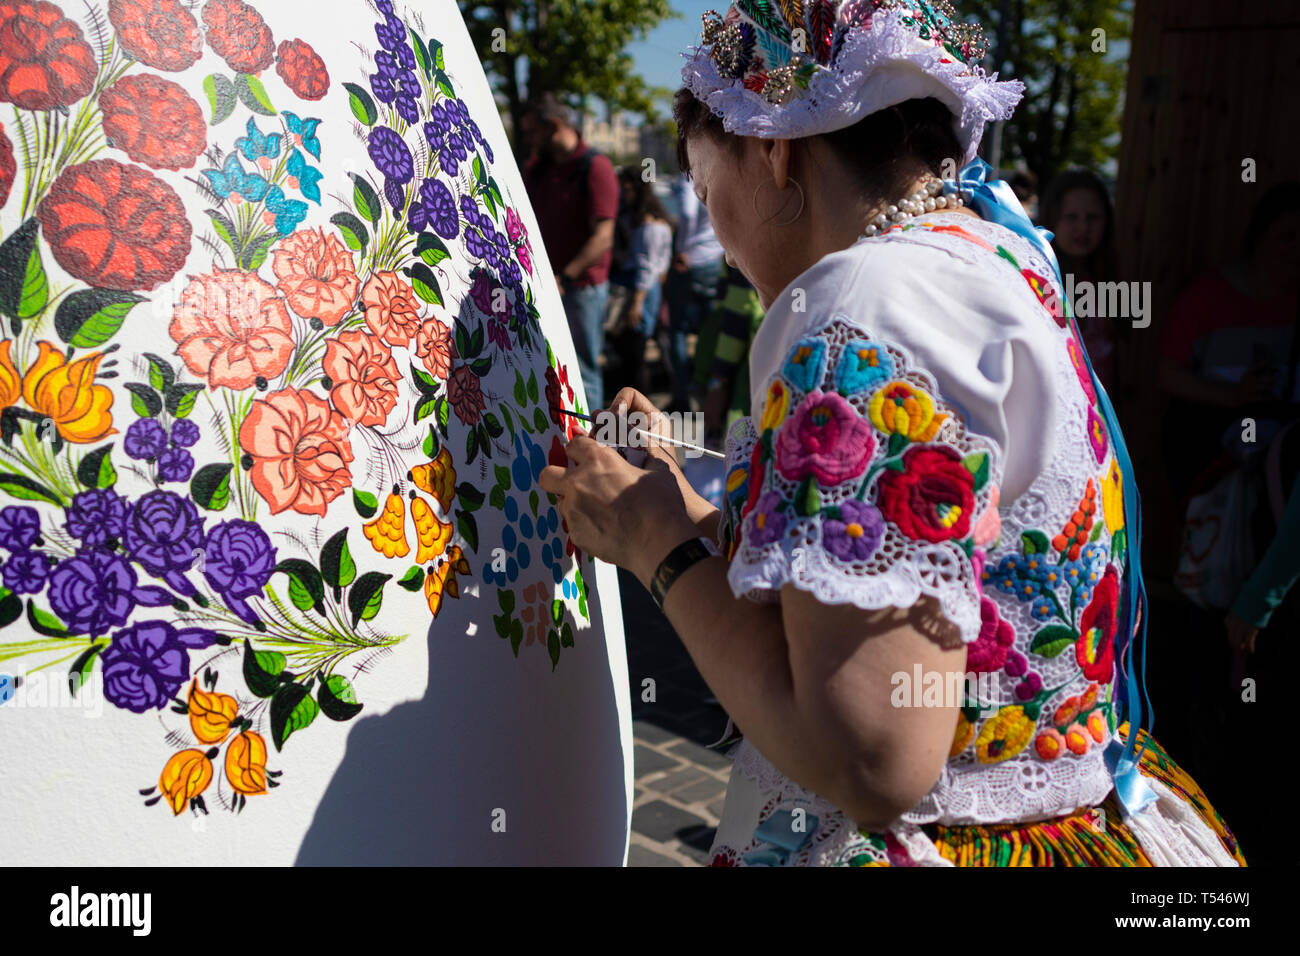 BUDAPEST/HUNGARY - 04.21.2019: A giant white Easter Egg is being decorated with folklore floral patterns by a young woman wearing traditional Hungaria Stock Photo